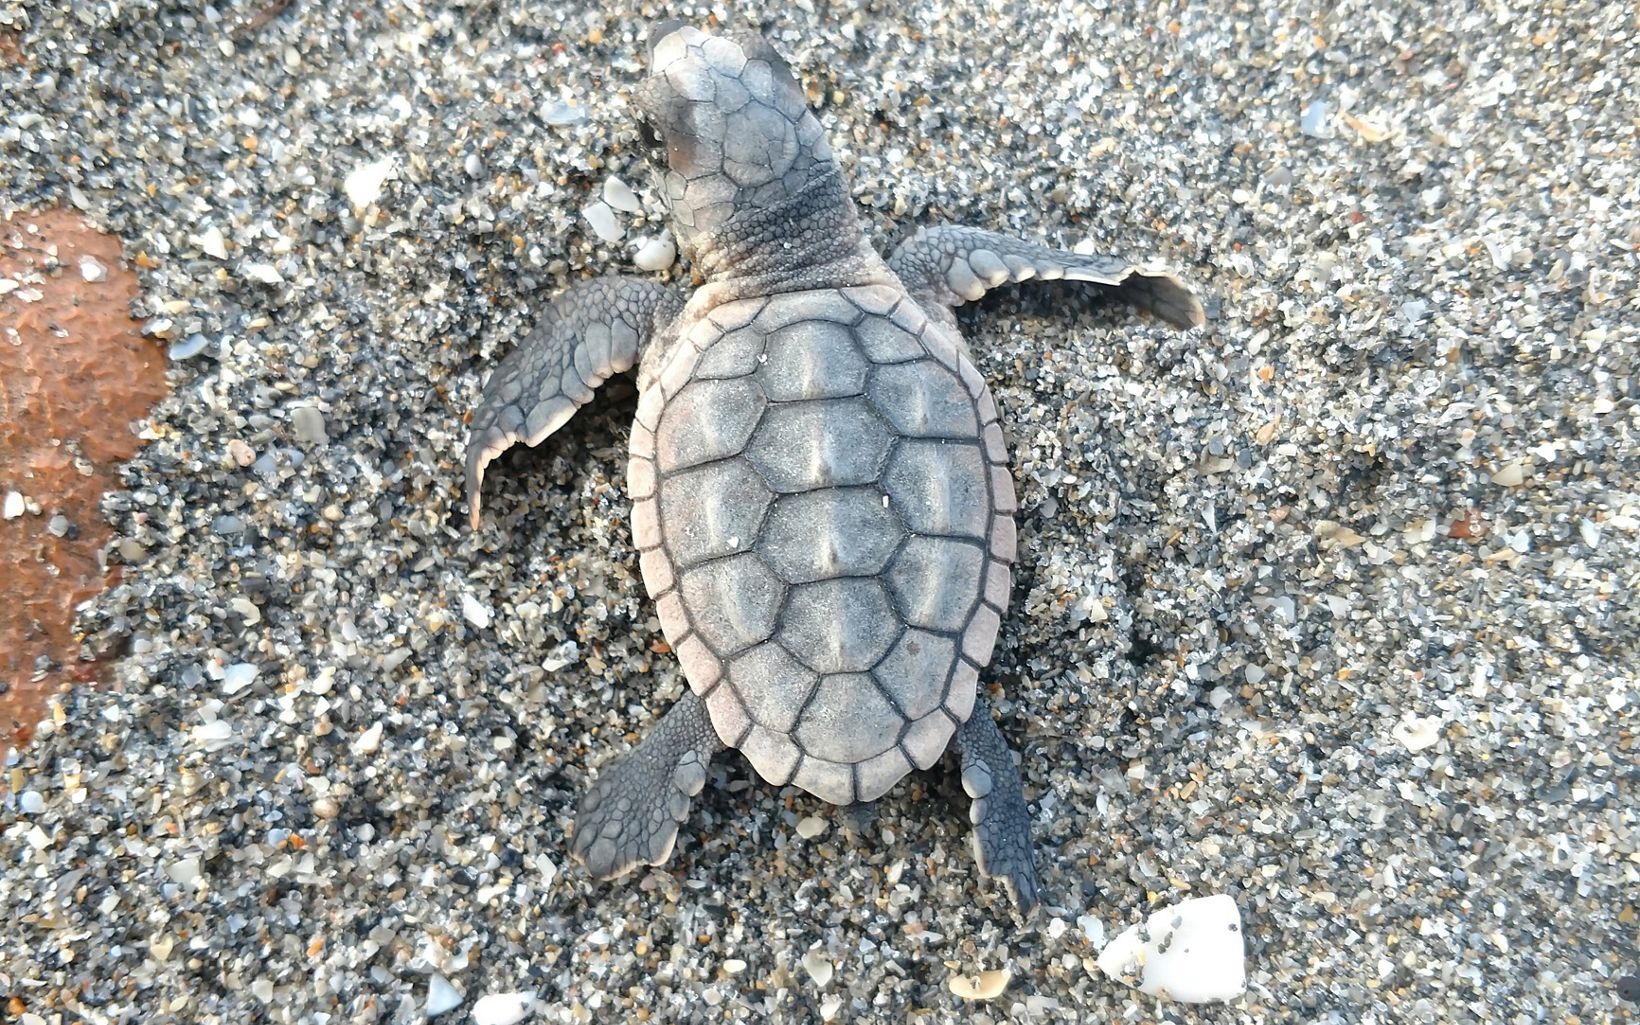 Sea turtle hatchling on the beach at Blowing Rocks Preserve.